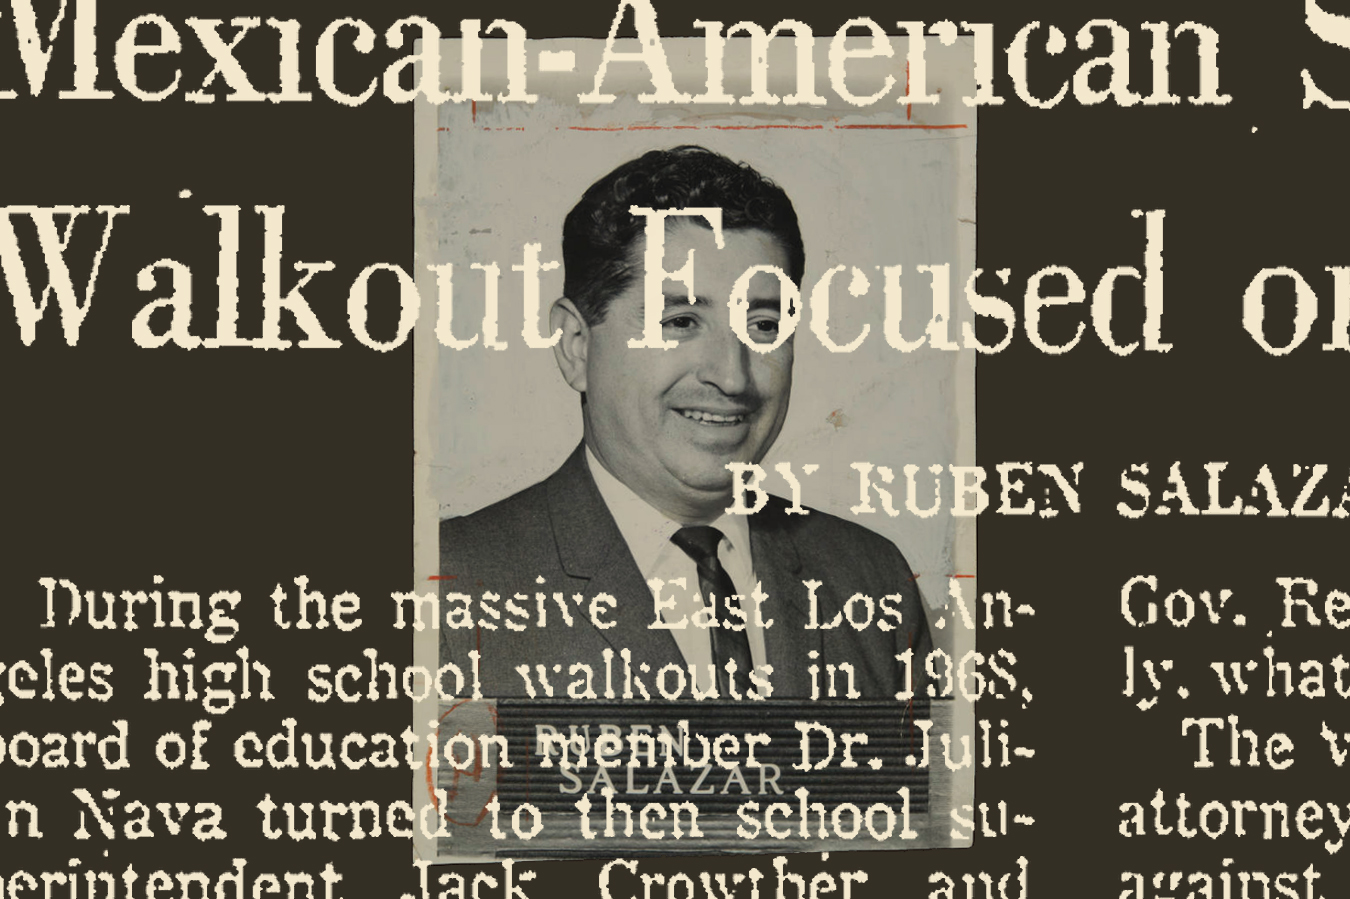 Ruben Salazar overlaid with a clipping from one of his columns.